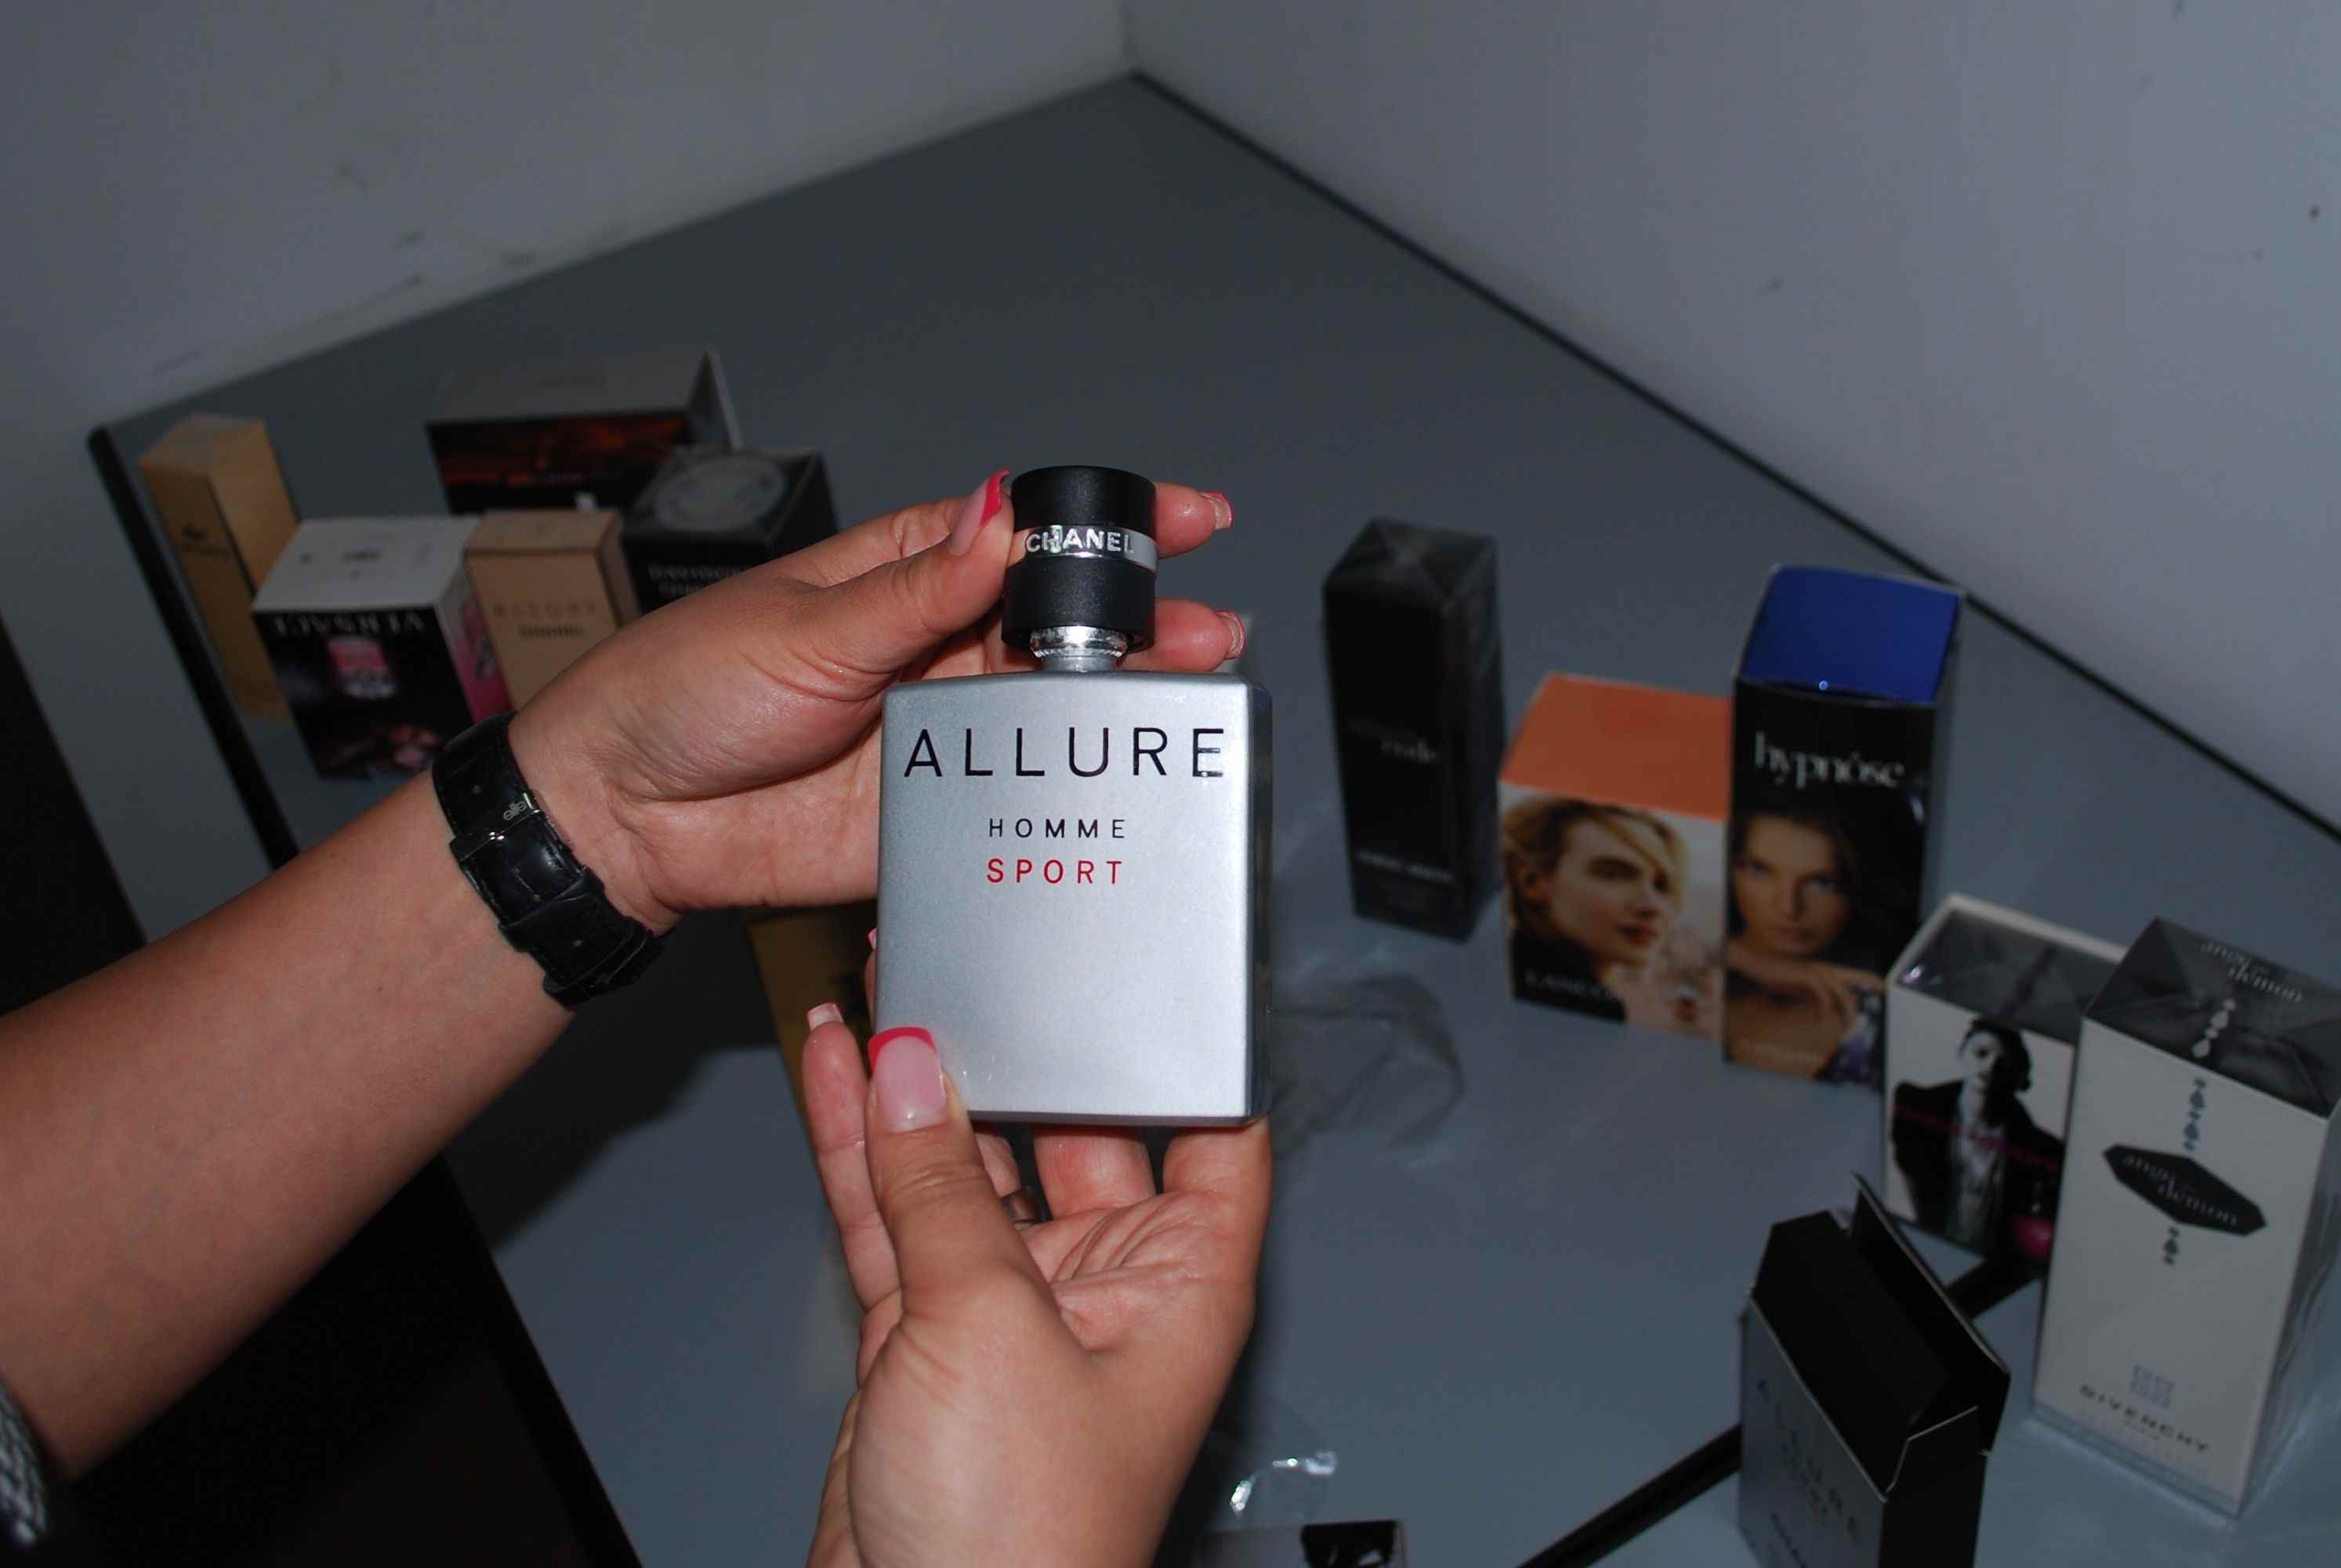 An allure that fades: counterfeit cosmetics can harm (picture: Adrian Mogos)